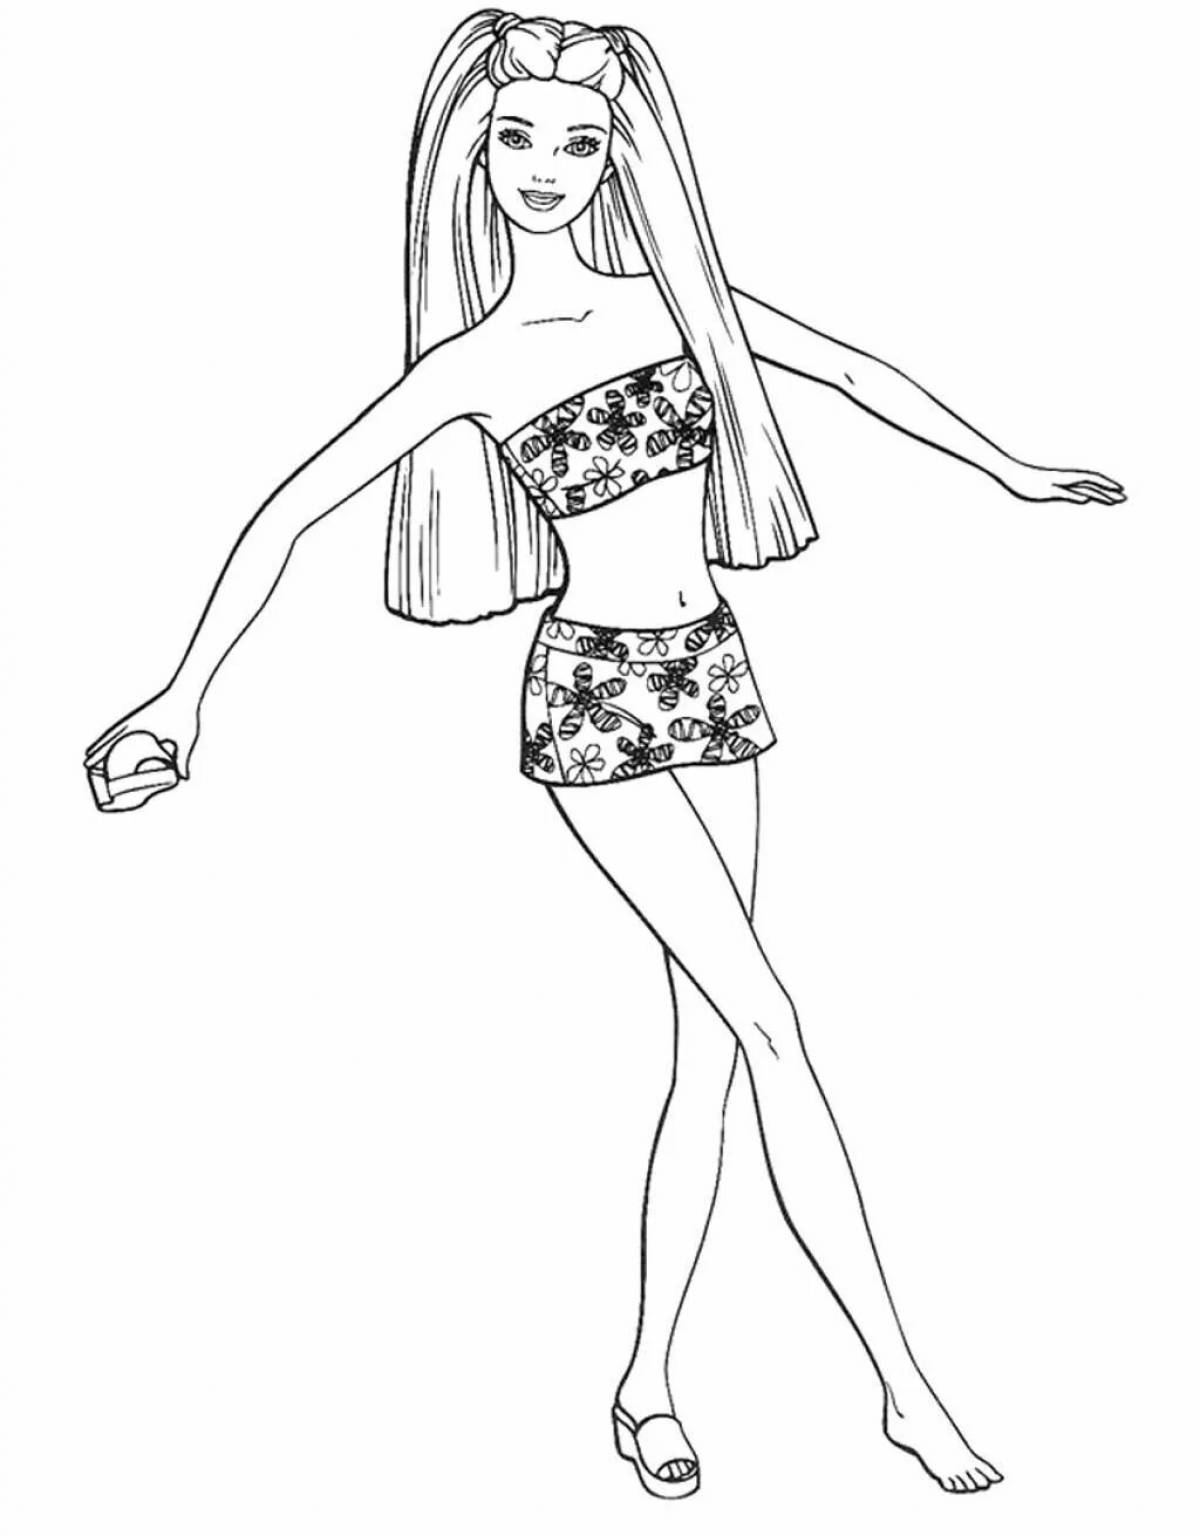 Fun coloring barbie doll in a bathing suit